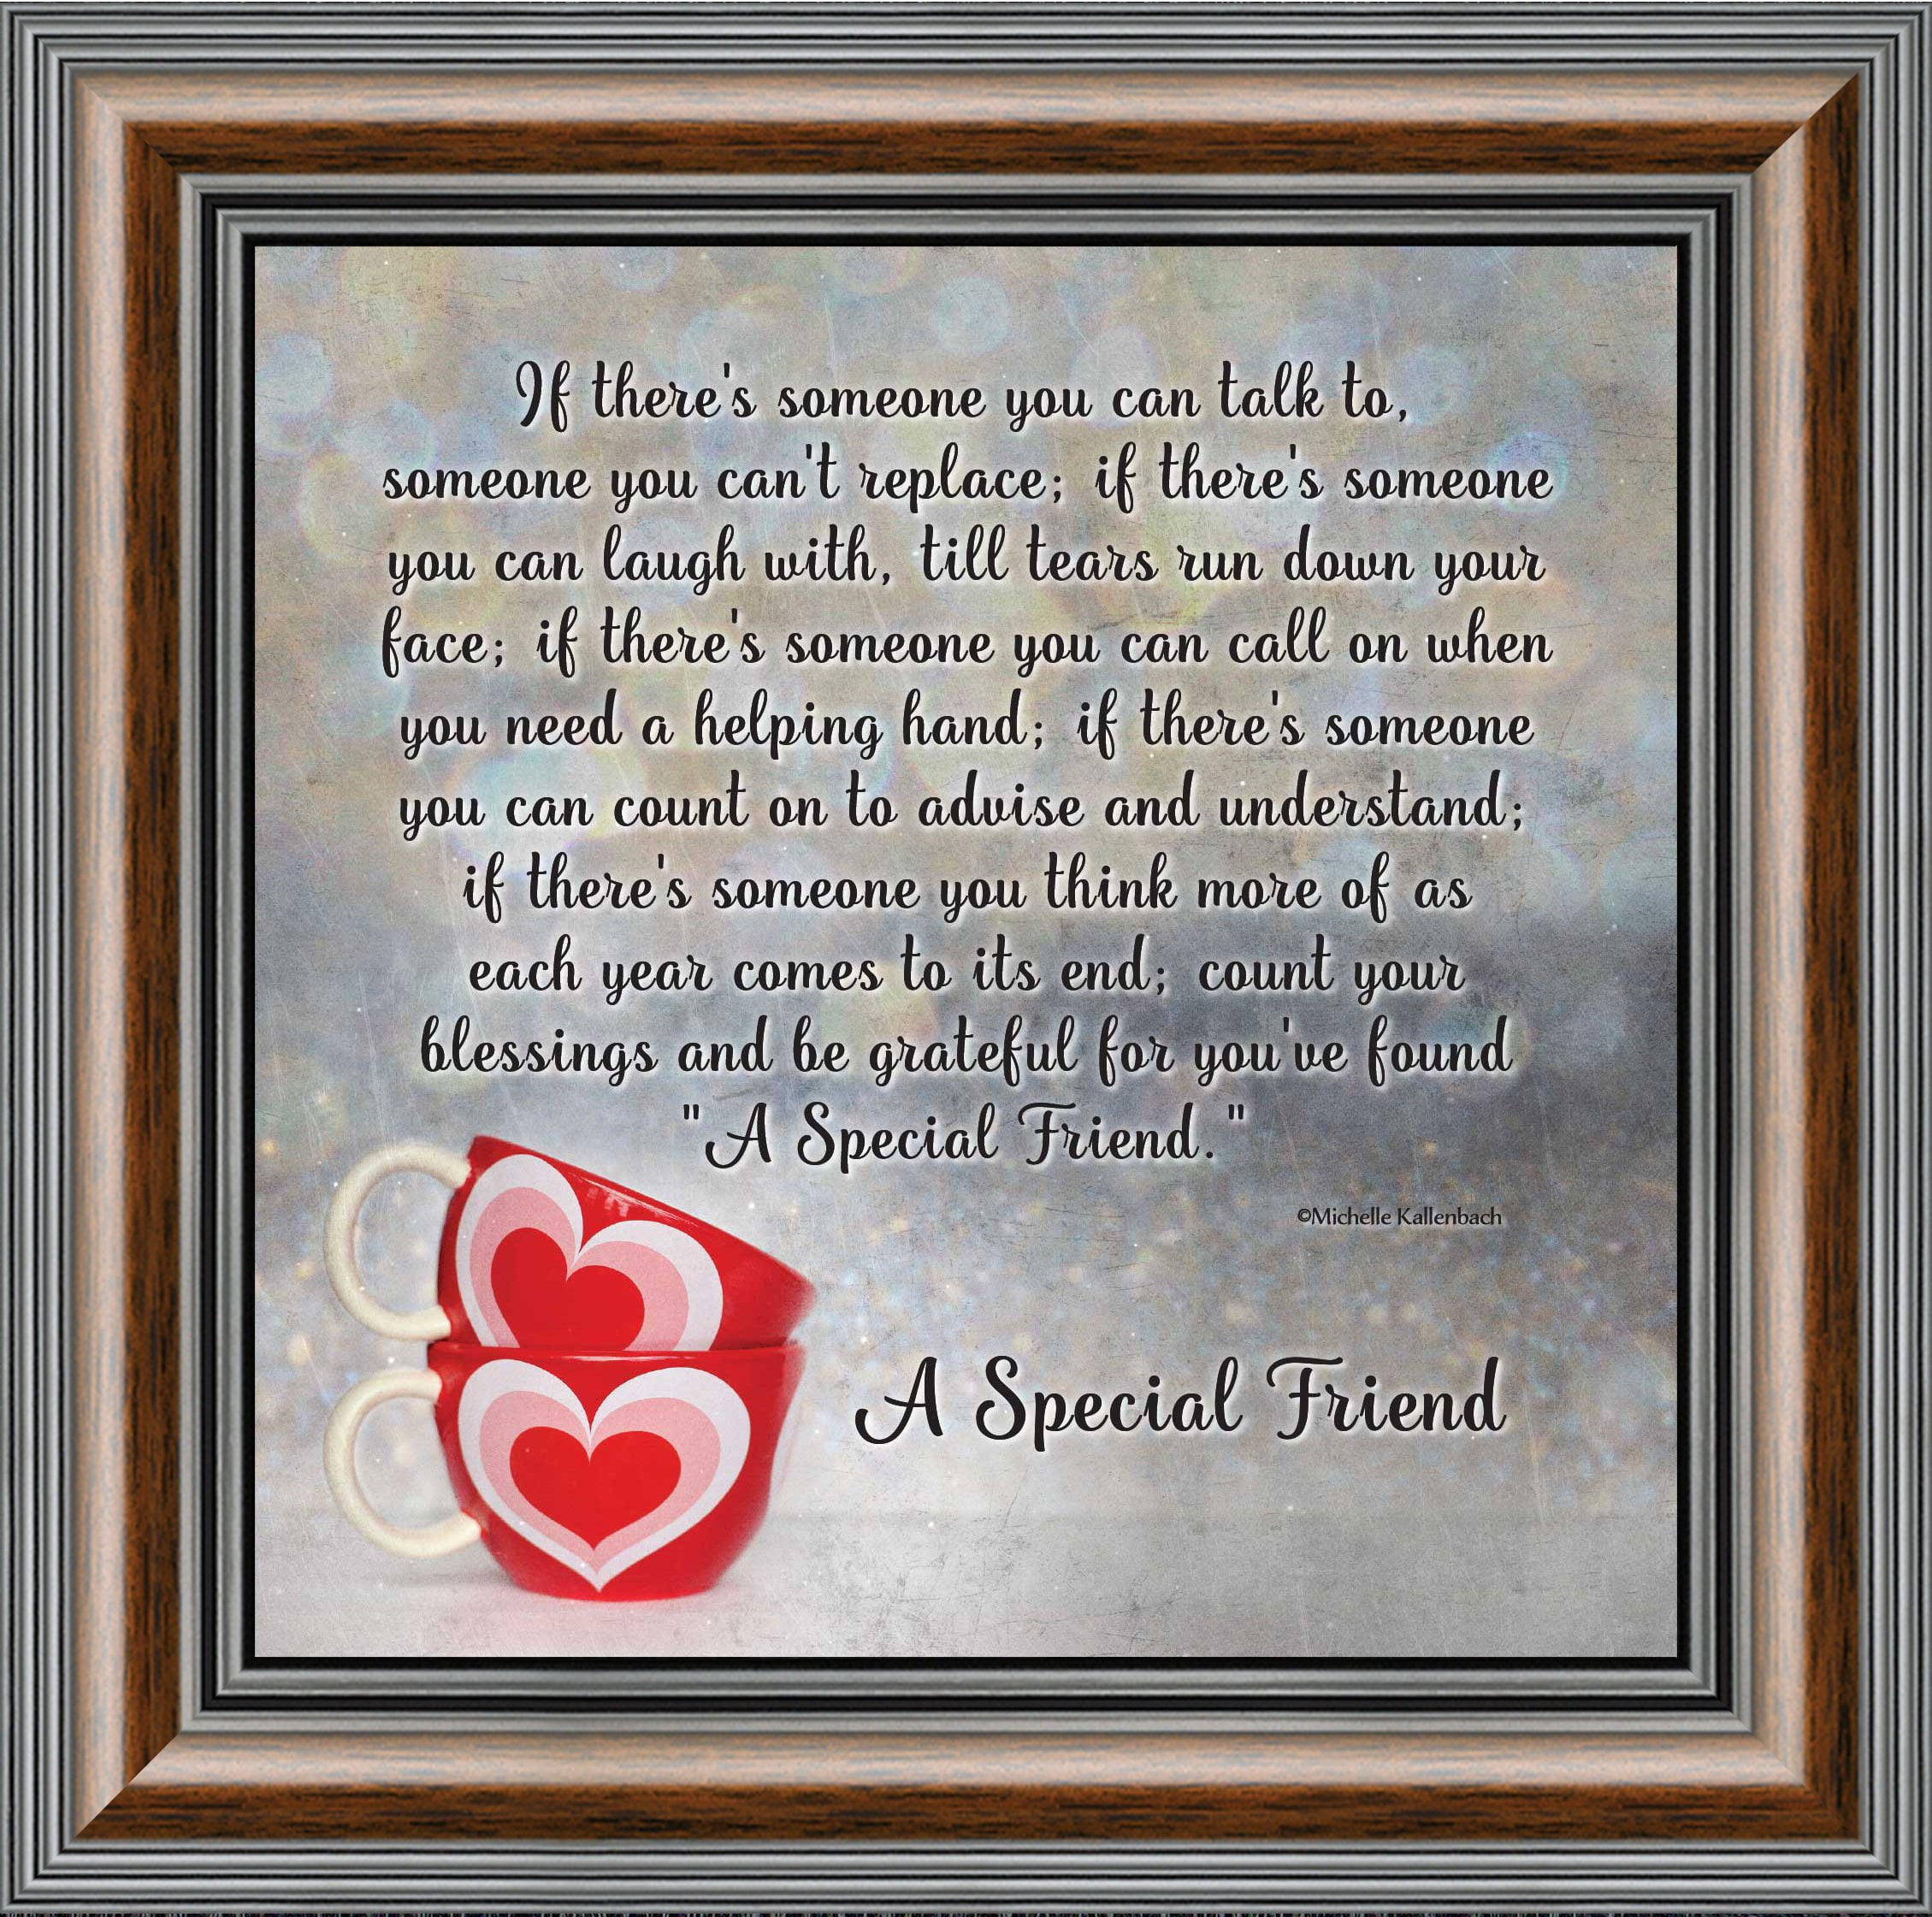 A Special Friend Picture Framed Poem About Friendship for